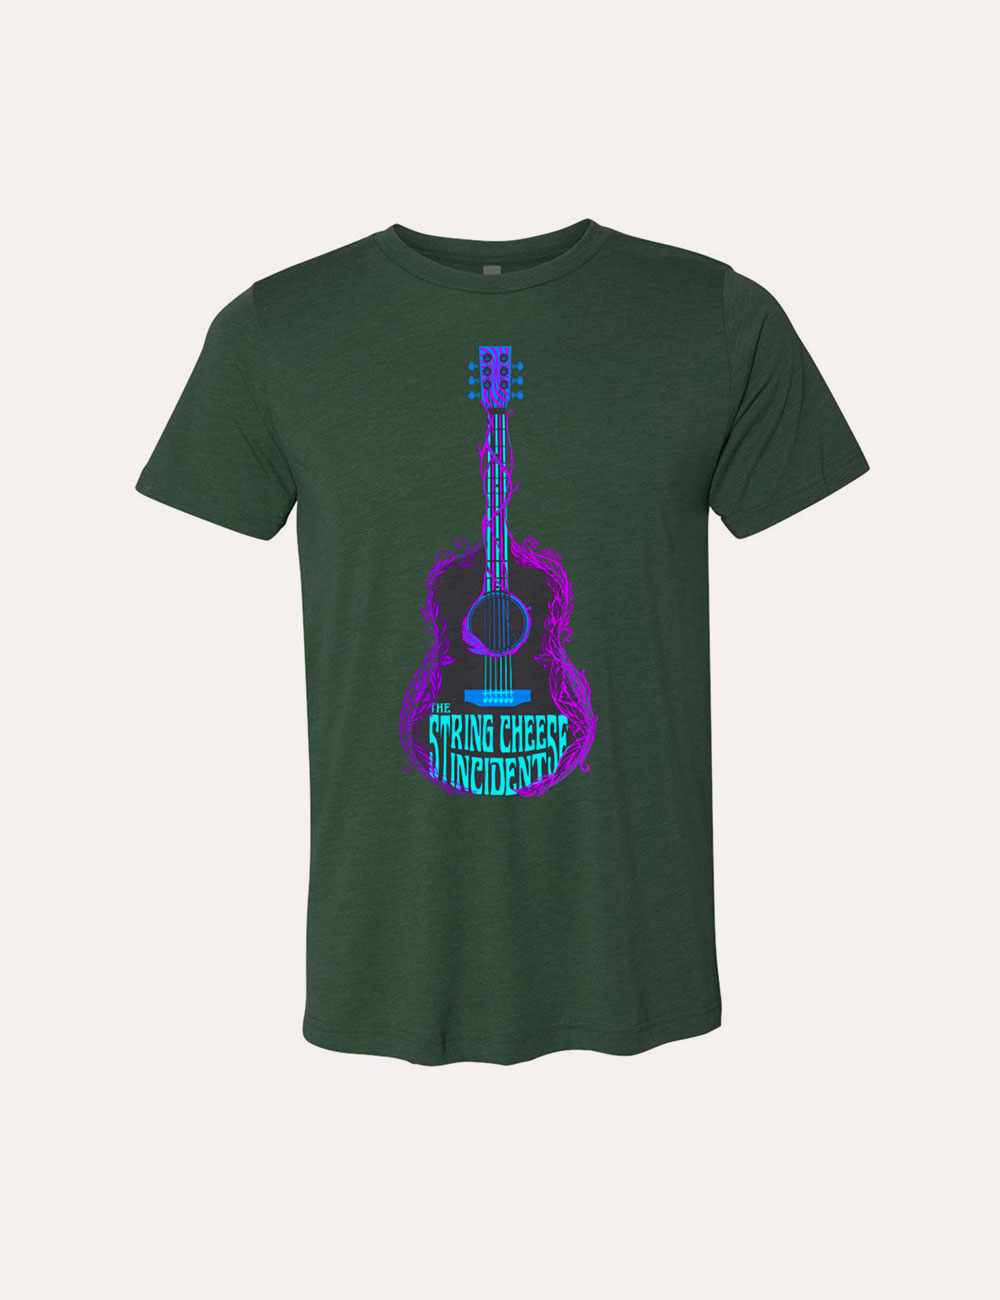 heese Incident - Womens - T-shirt - Growing Guitar Front